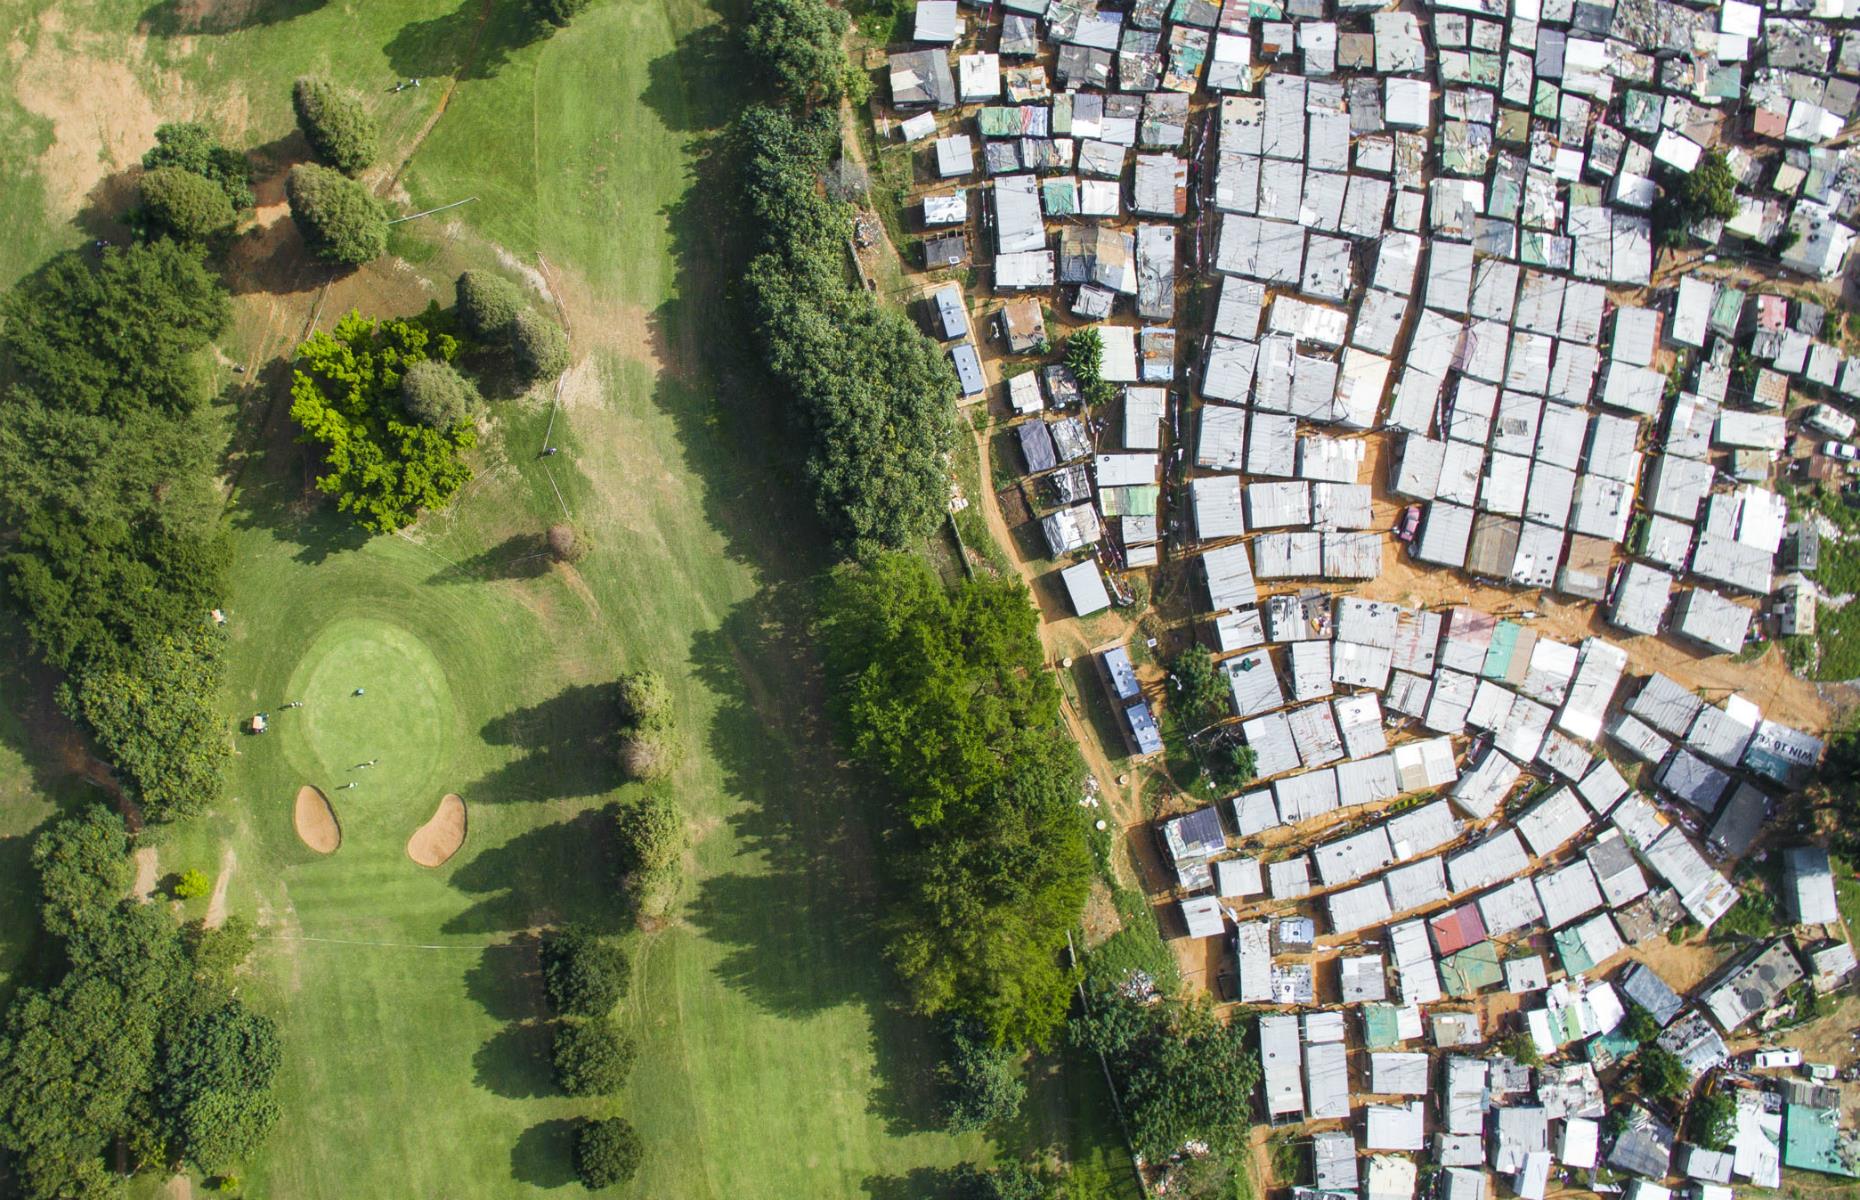 <p>This aerial view of Durban in South Africa shows how the Papwa Sewgolum Golf Course sits right next to a slum's tin shack homes. "In a twist of irony, the golf course is named after an Apartheid-era golfer of Indian descent, Sewsunker 'Papwa' Sewgolum," Miller told <em>the Telegraph</em> in a 2018 interview. "When he won the Natal Open in 1965, he had to receive his trophy outside, in the pouring rain, while the white players sat comfortably inside."</p>